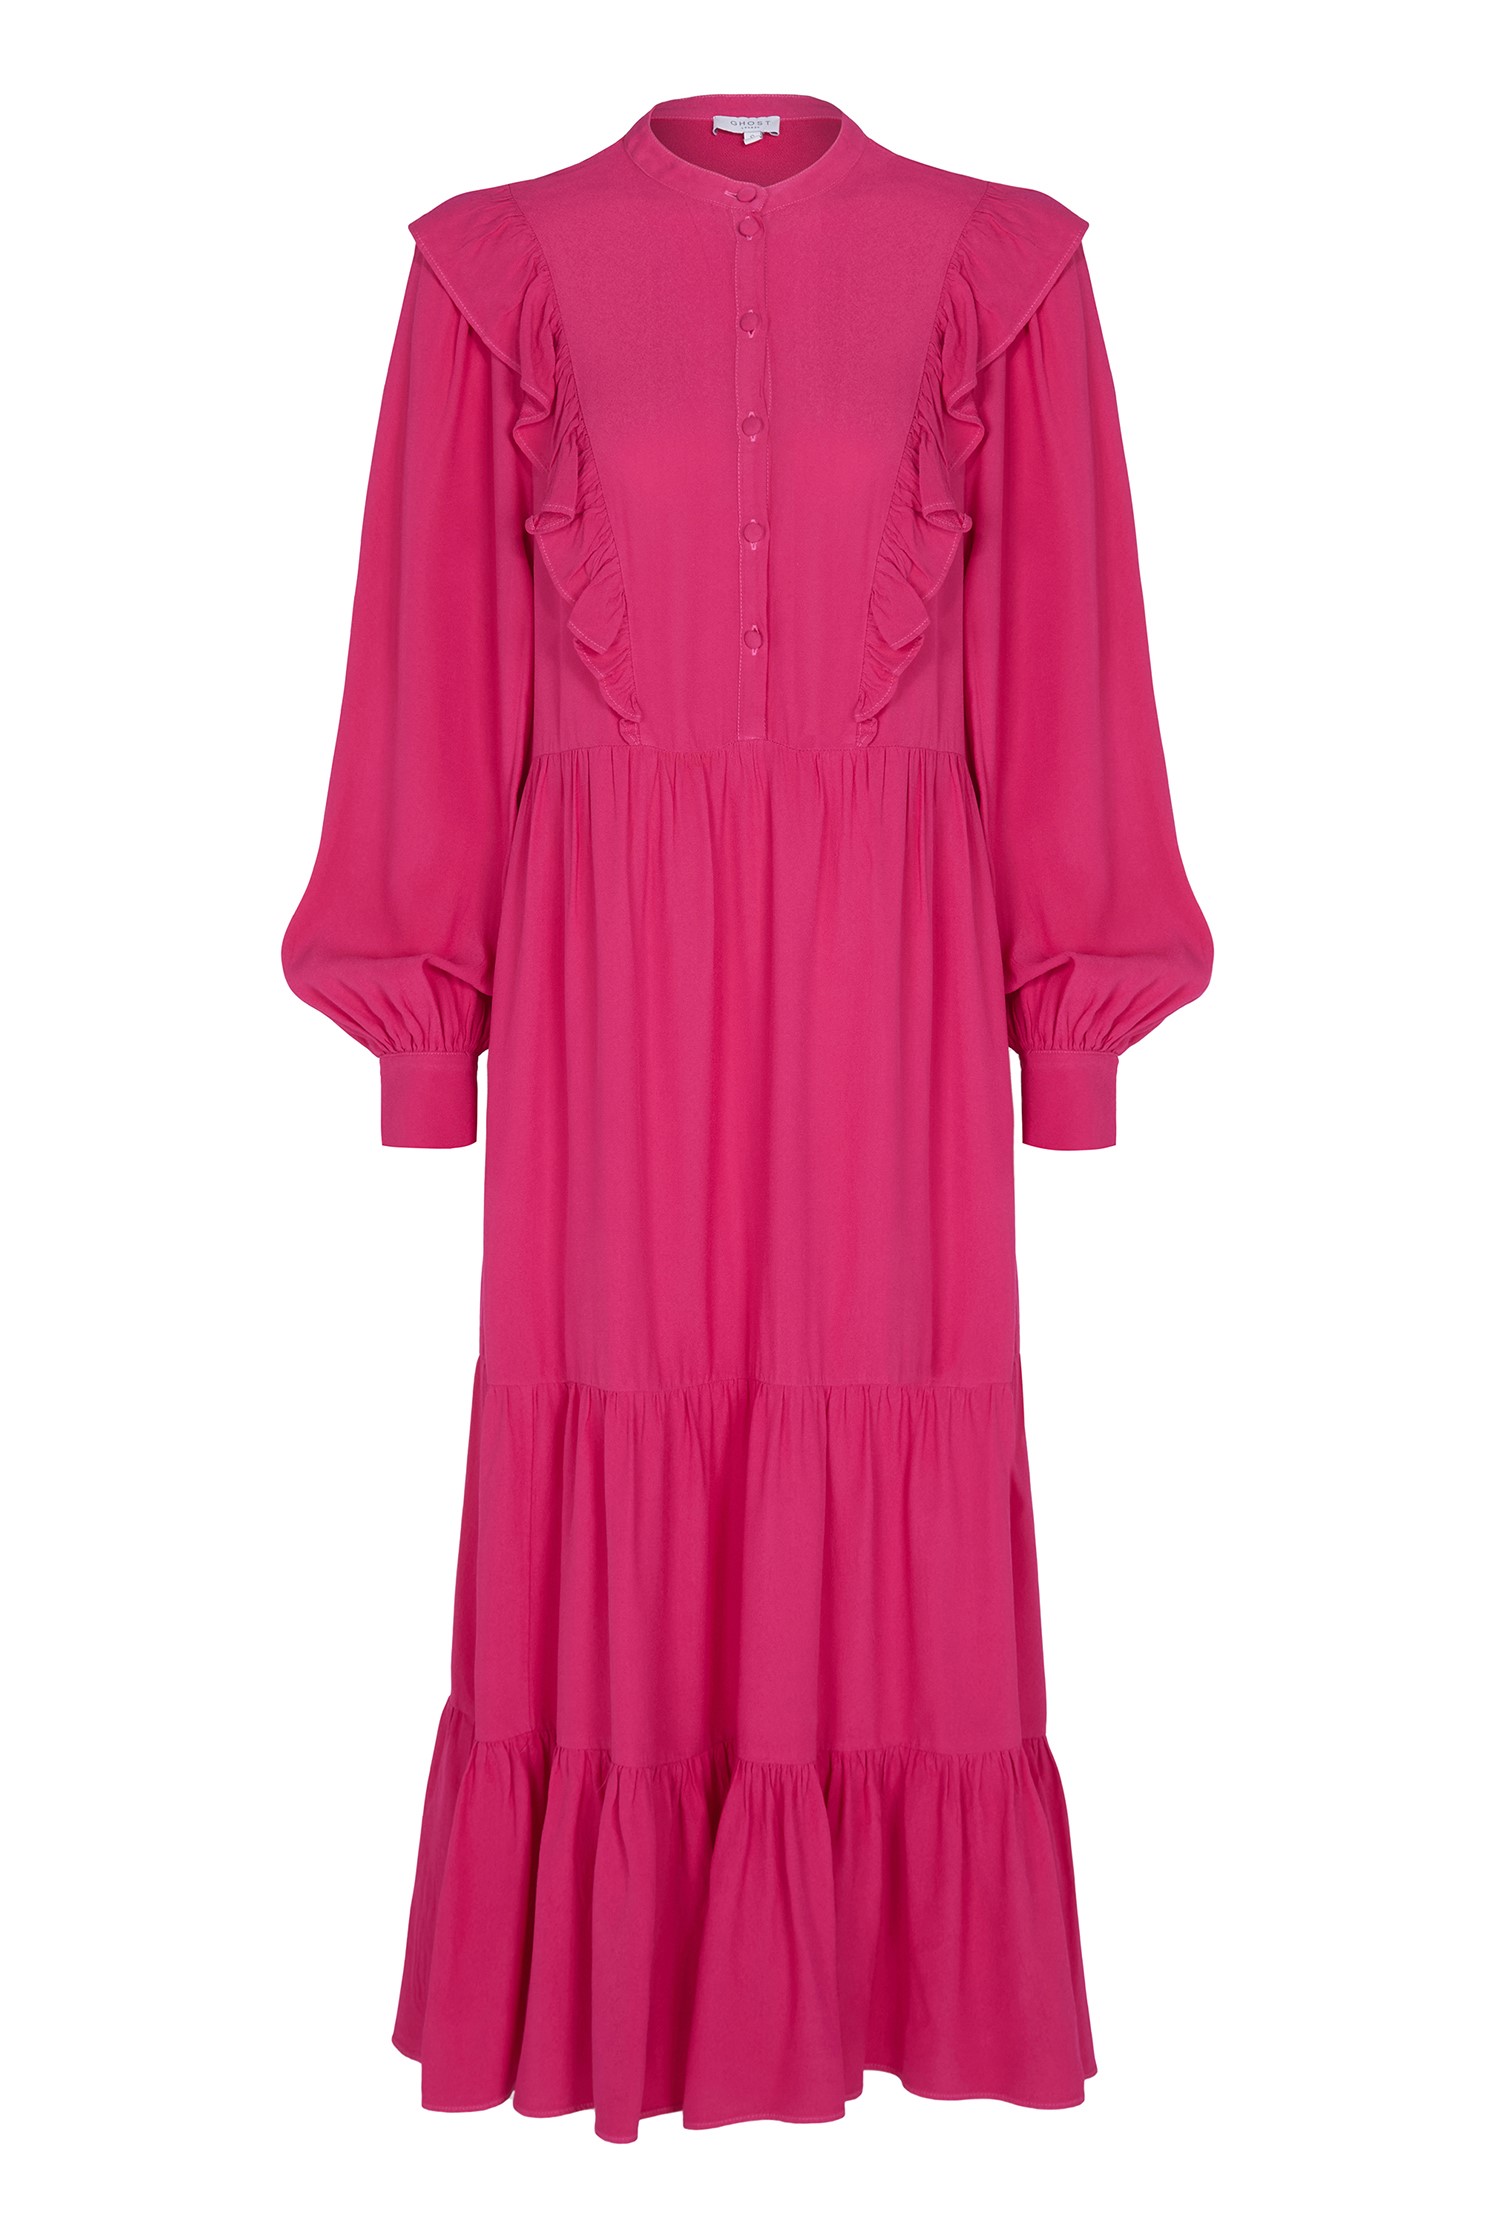 Midi Crepe Dress With Long Plain Sleeves In Pink With Voluminous ...